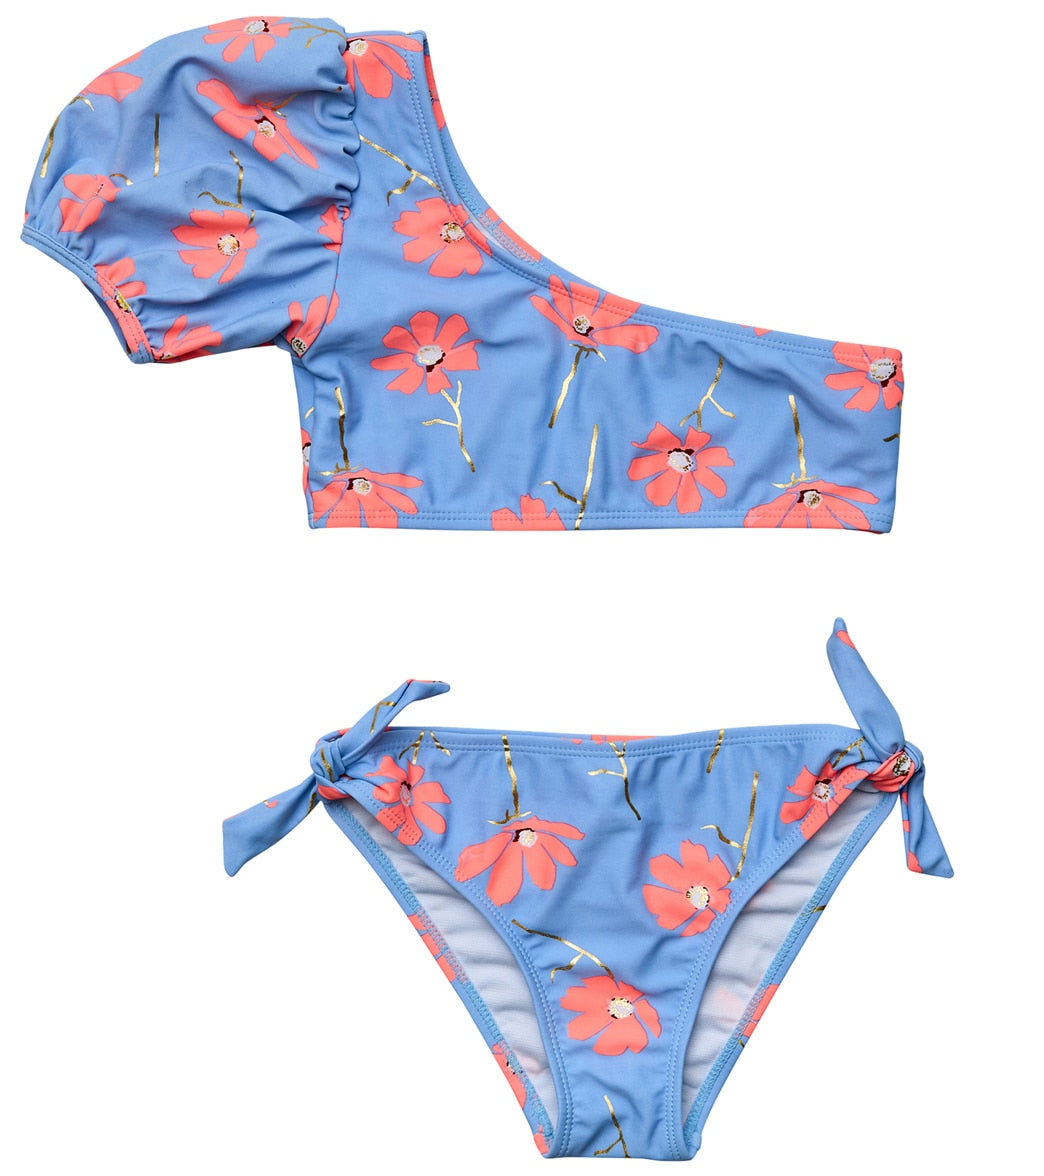 Cute Pink Swimsuits For Women & Teens Cheap Bathing Suit Flounce